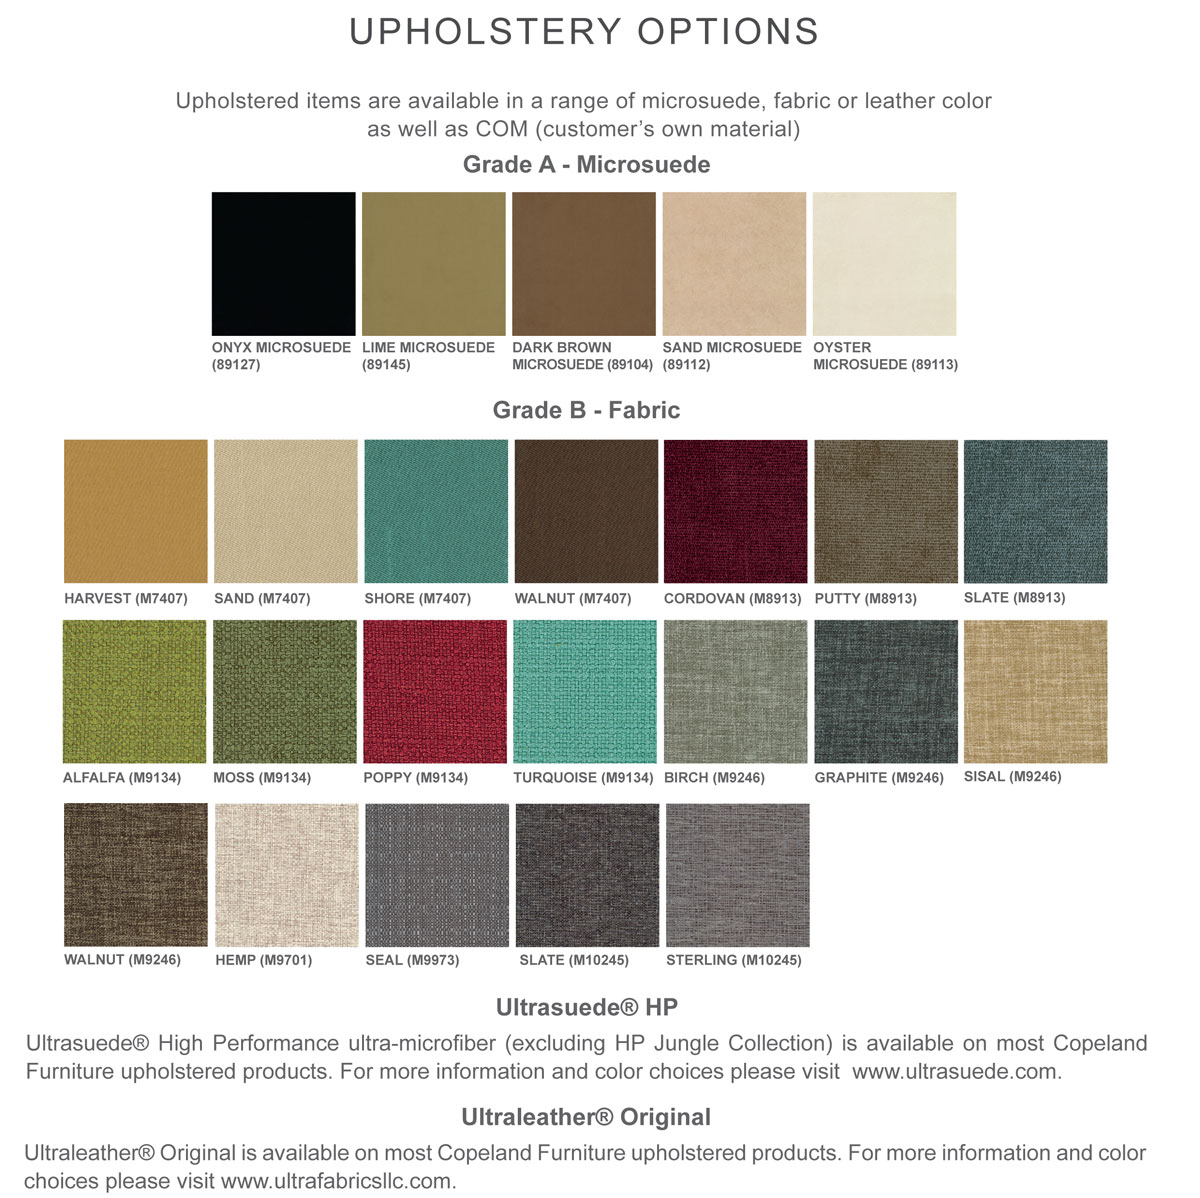 Upholstery Options for Headboad